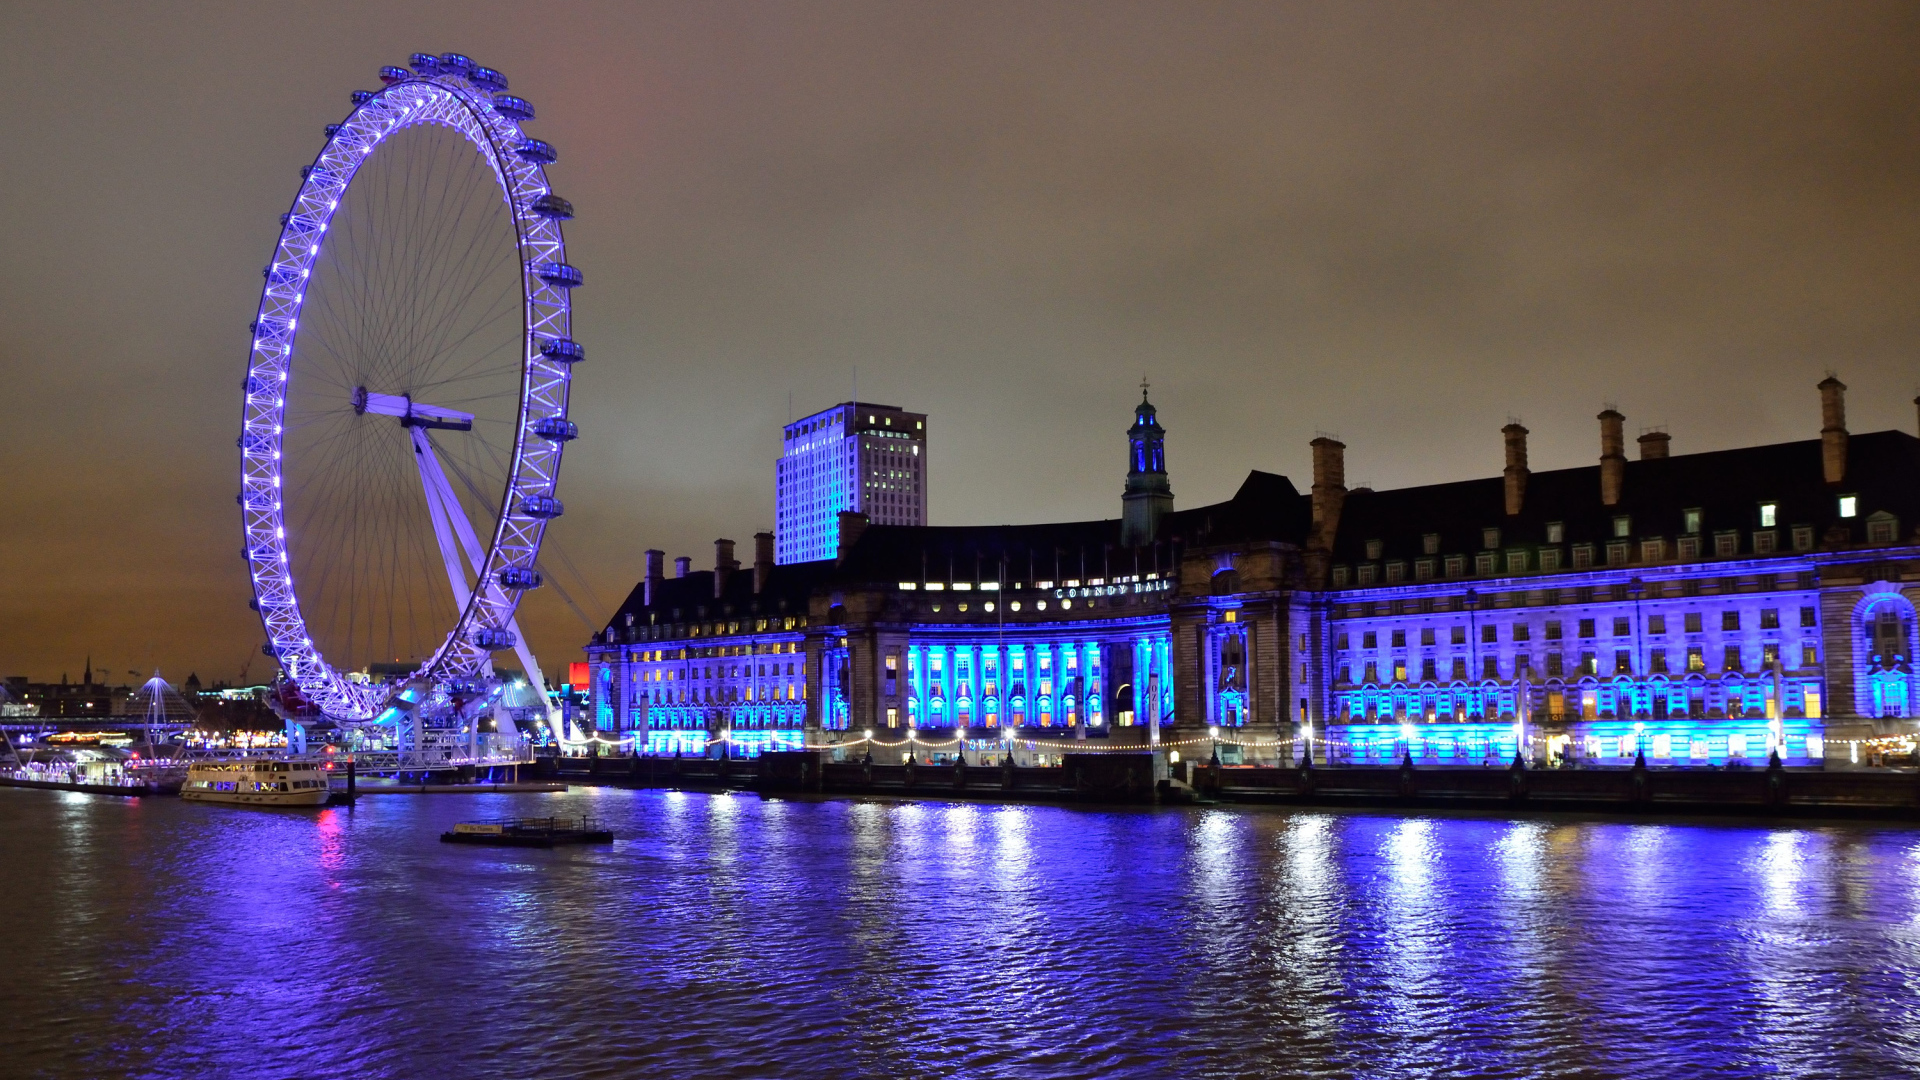 Ferris wheel by the water at night, London